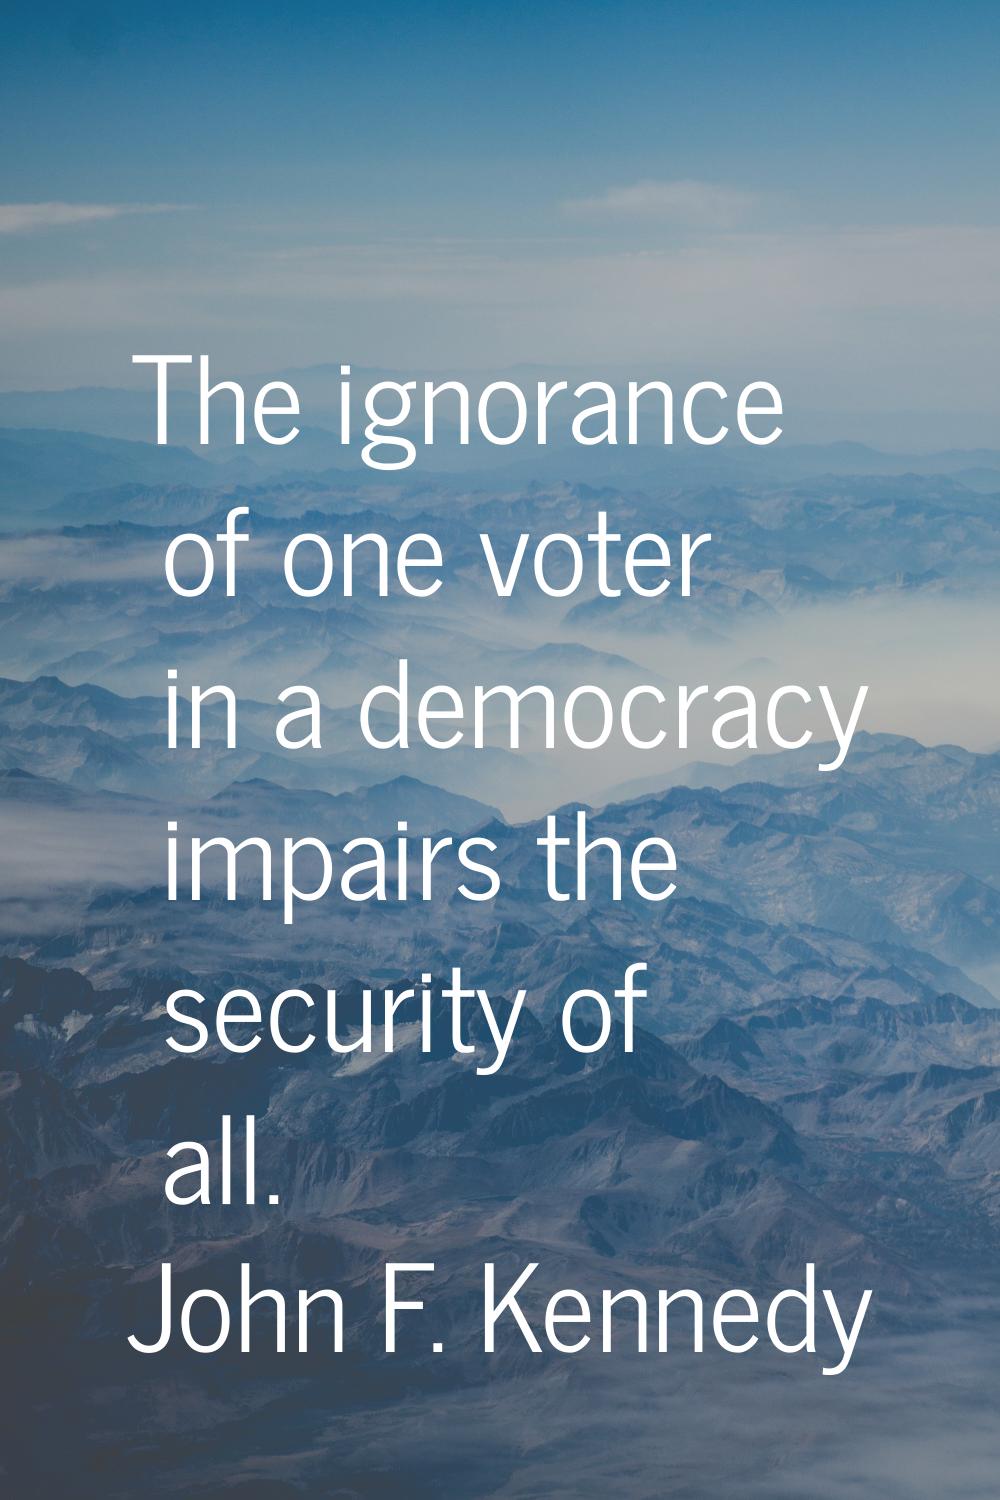 The ignorance of one voter in a democracy impairs the security of all.